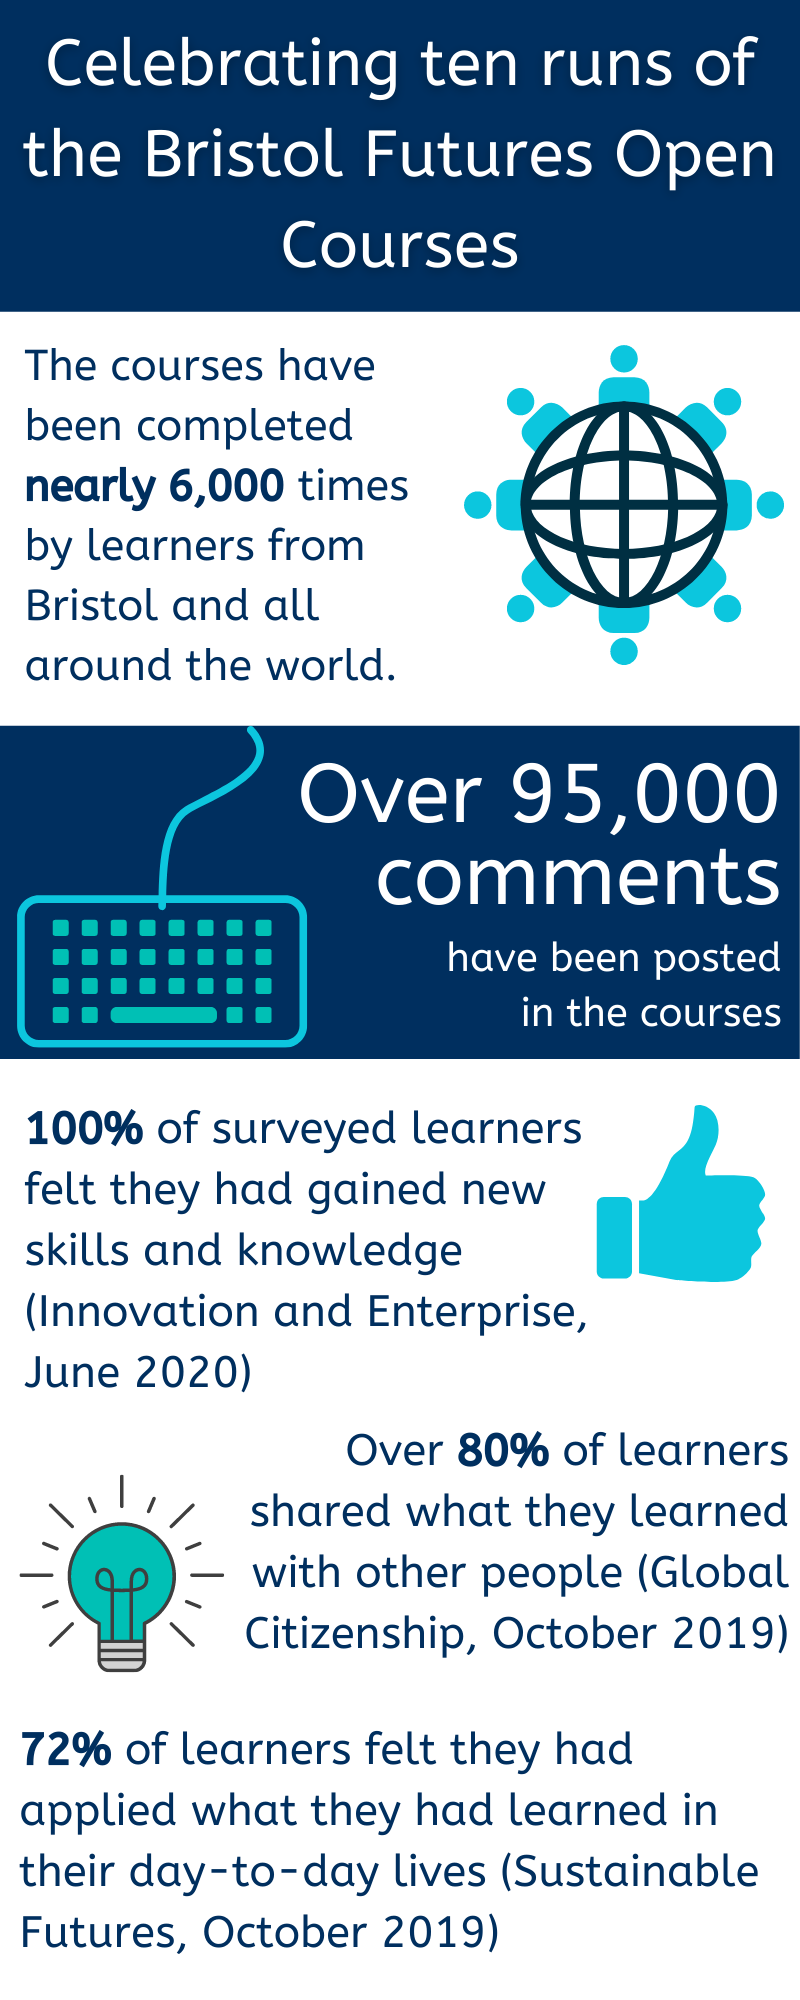 Celebrating 10 runs of the Bristol Futures Open Courses. They have been completed nearly 6000 times by learners from Bristol and all around the world. Over 95000 comments have been posted in the courses. Click to learn more about what learners thought (text version).